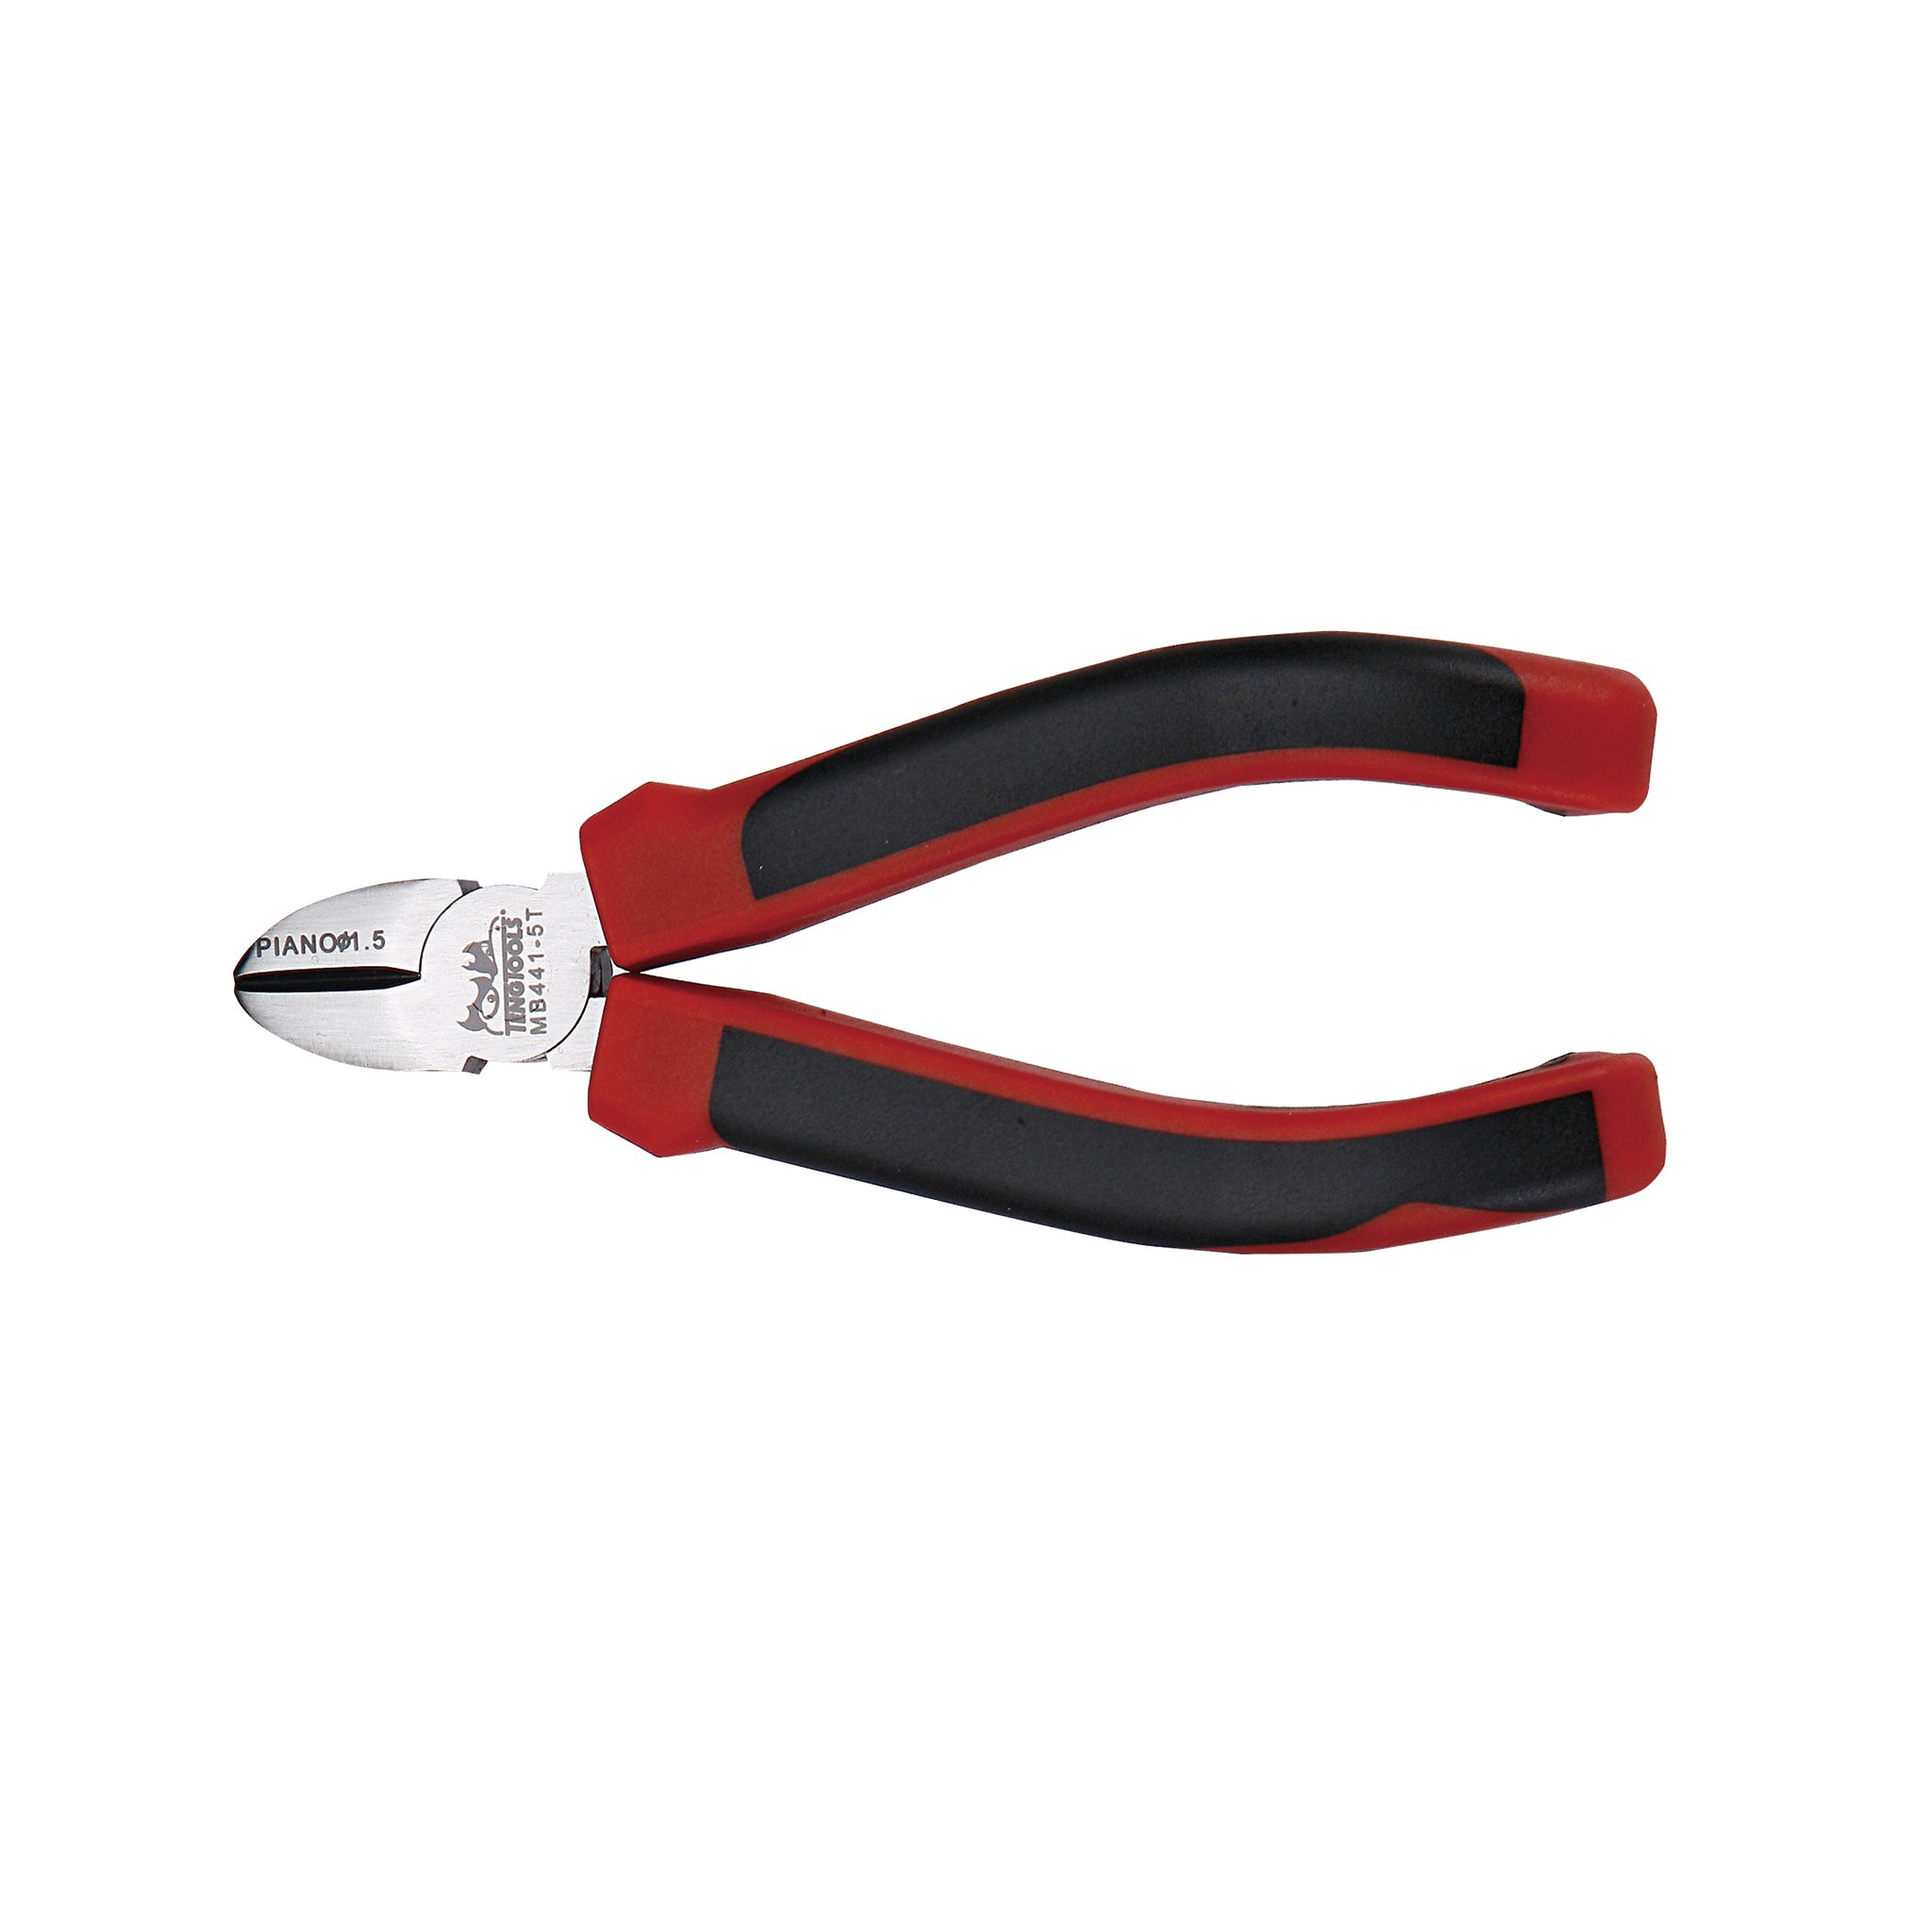 Teng Tools Side Cutter Pliers With TPR Grip Handles - 6